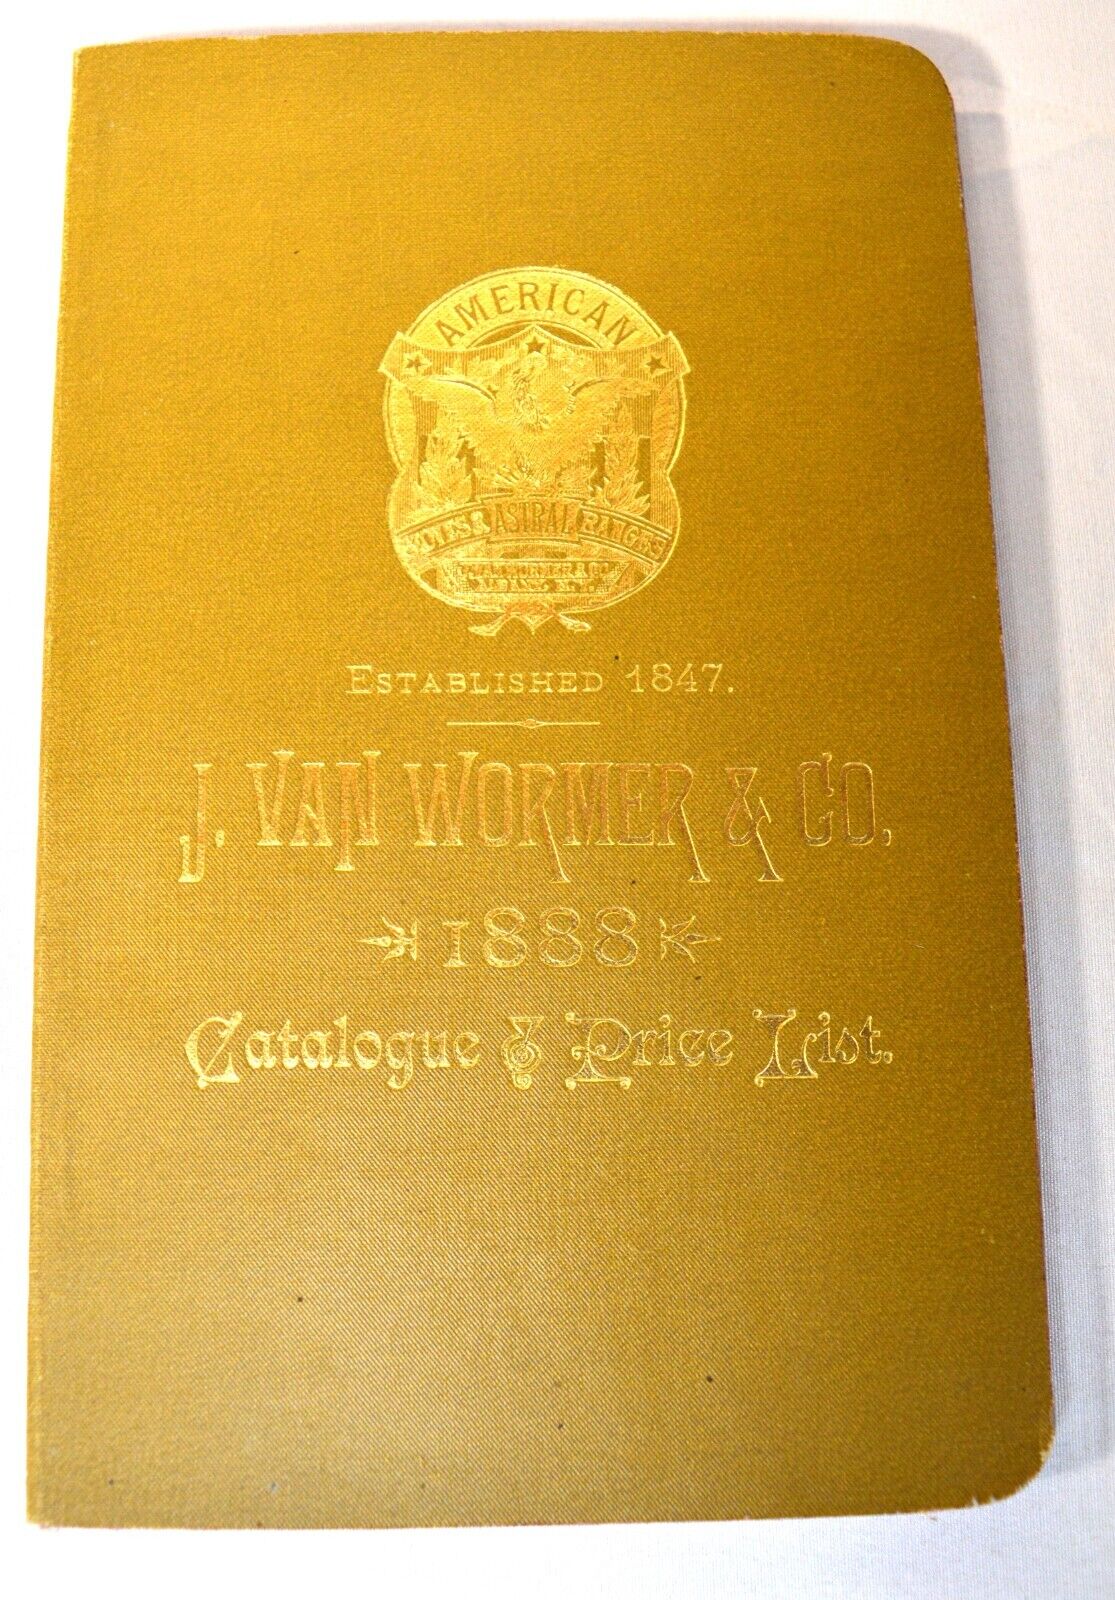 Antique 1888 - J. Van Wormer & Co. - Catalogue & Price List, Heating Stoves RARE